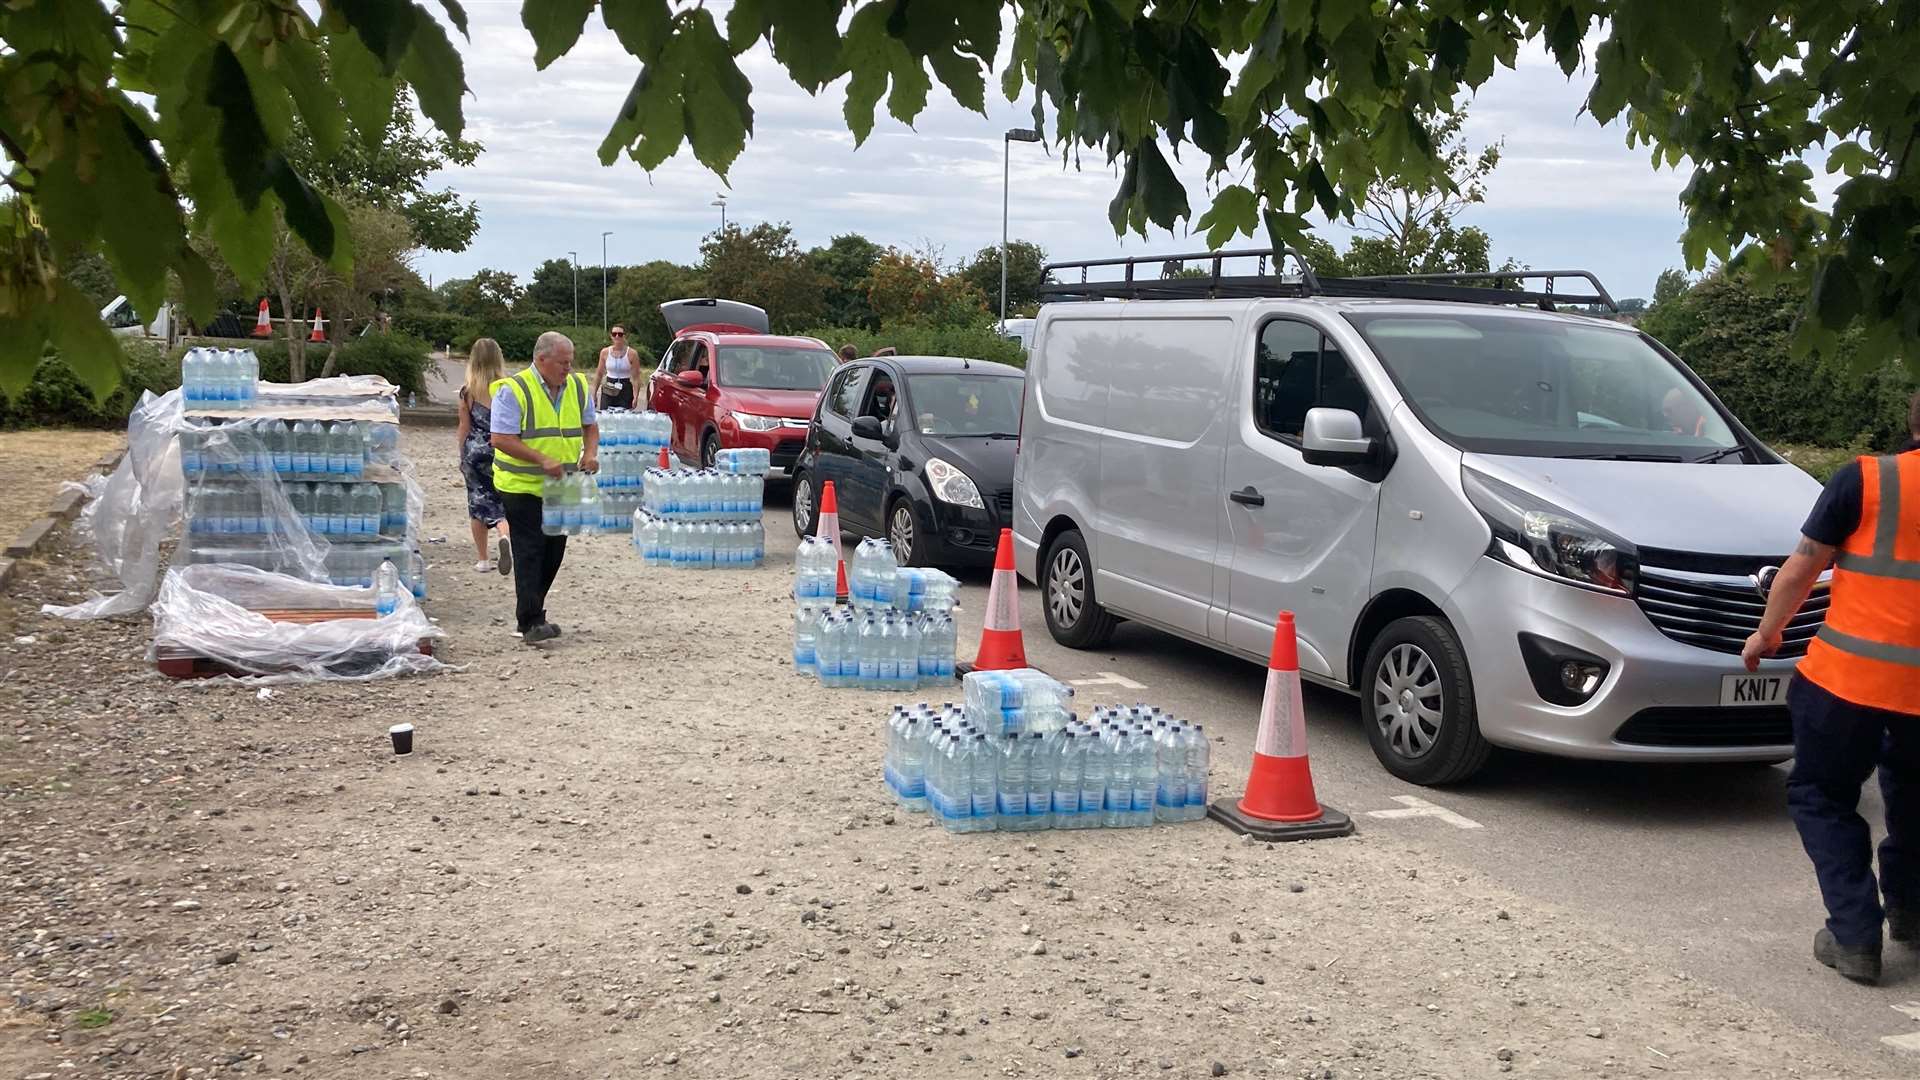 A bottled water bank was set up behind an amusement arcade in Leysdown when Sheppey had its water supply cut off